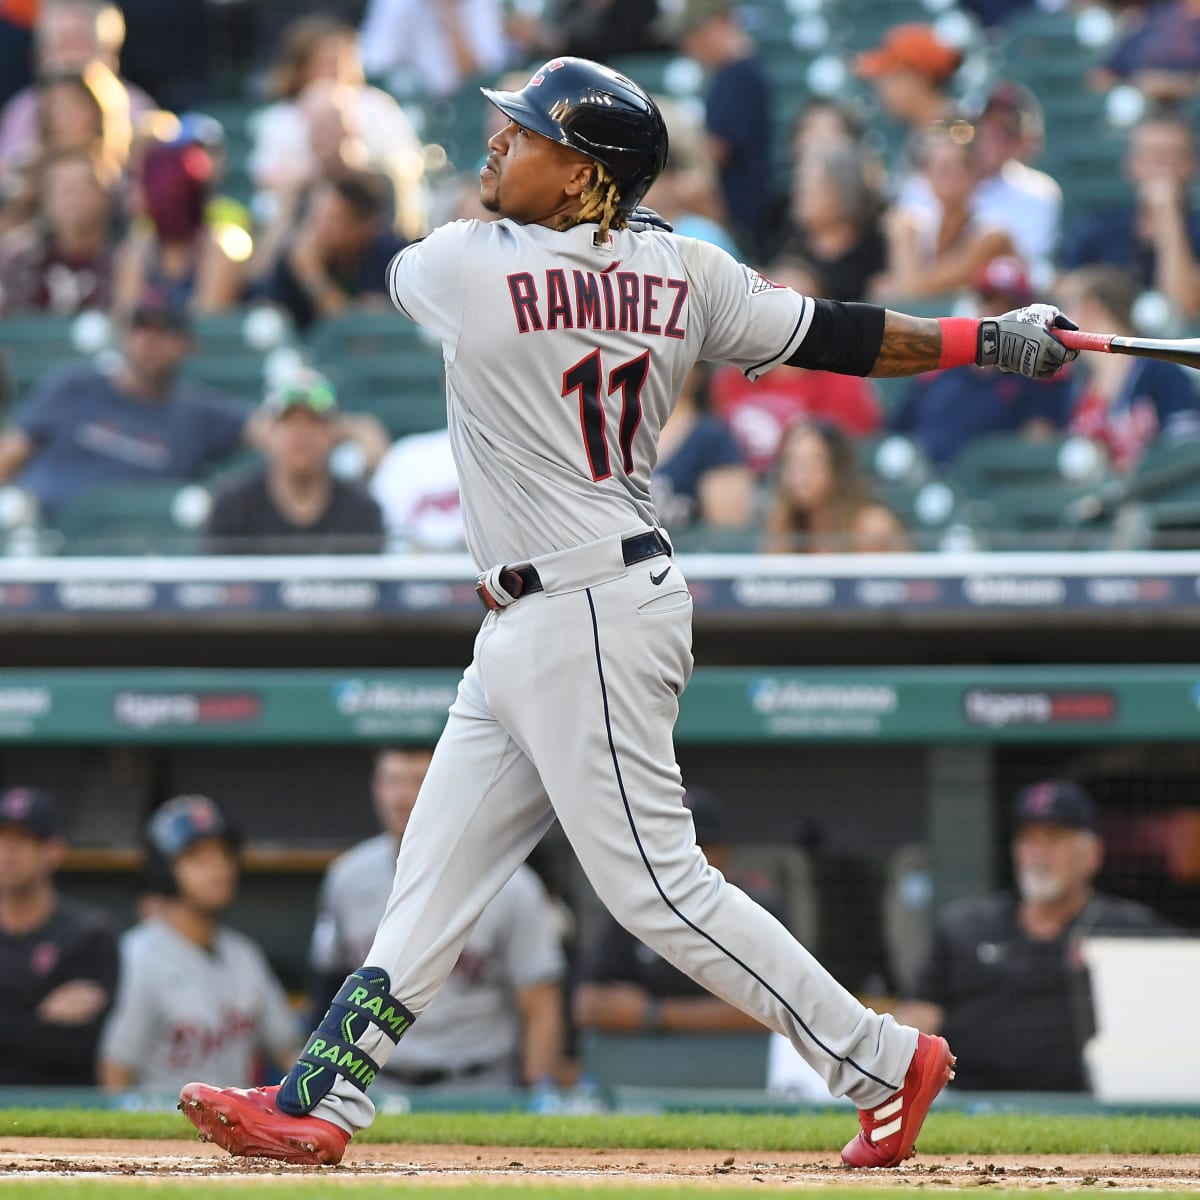 Explaining The Rationale Behind Jose Ramirez's New Role With The